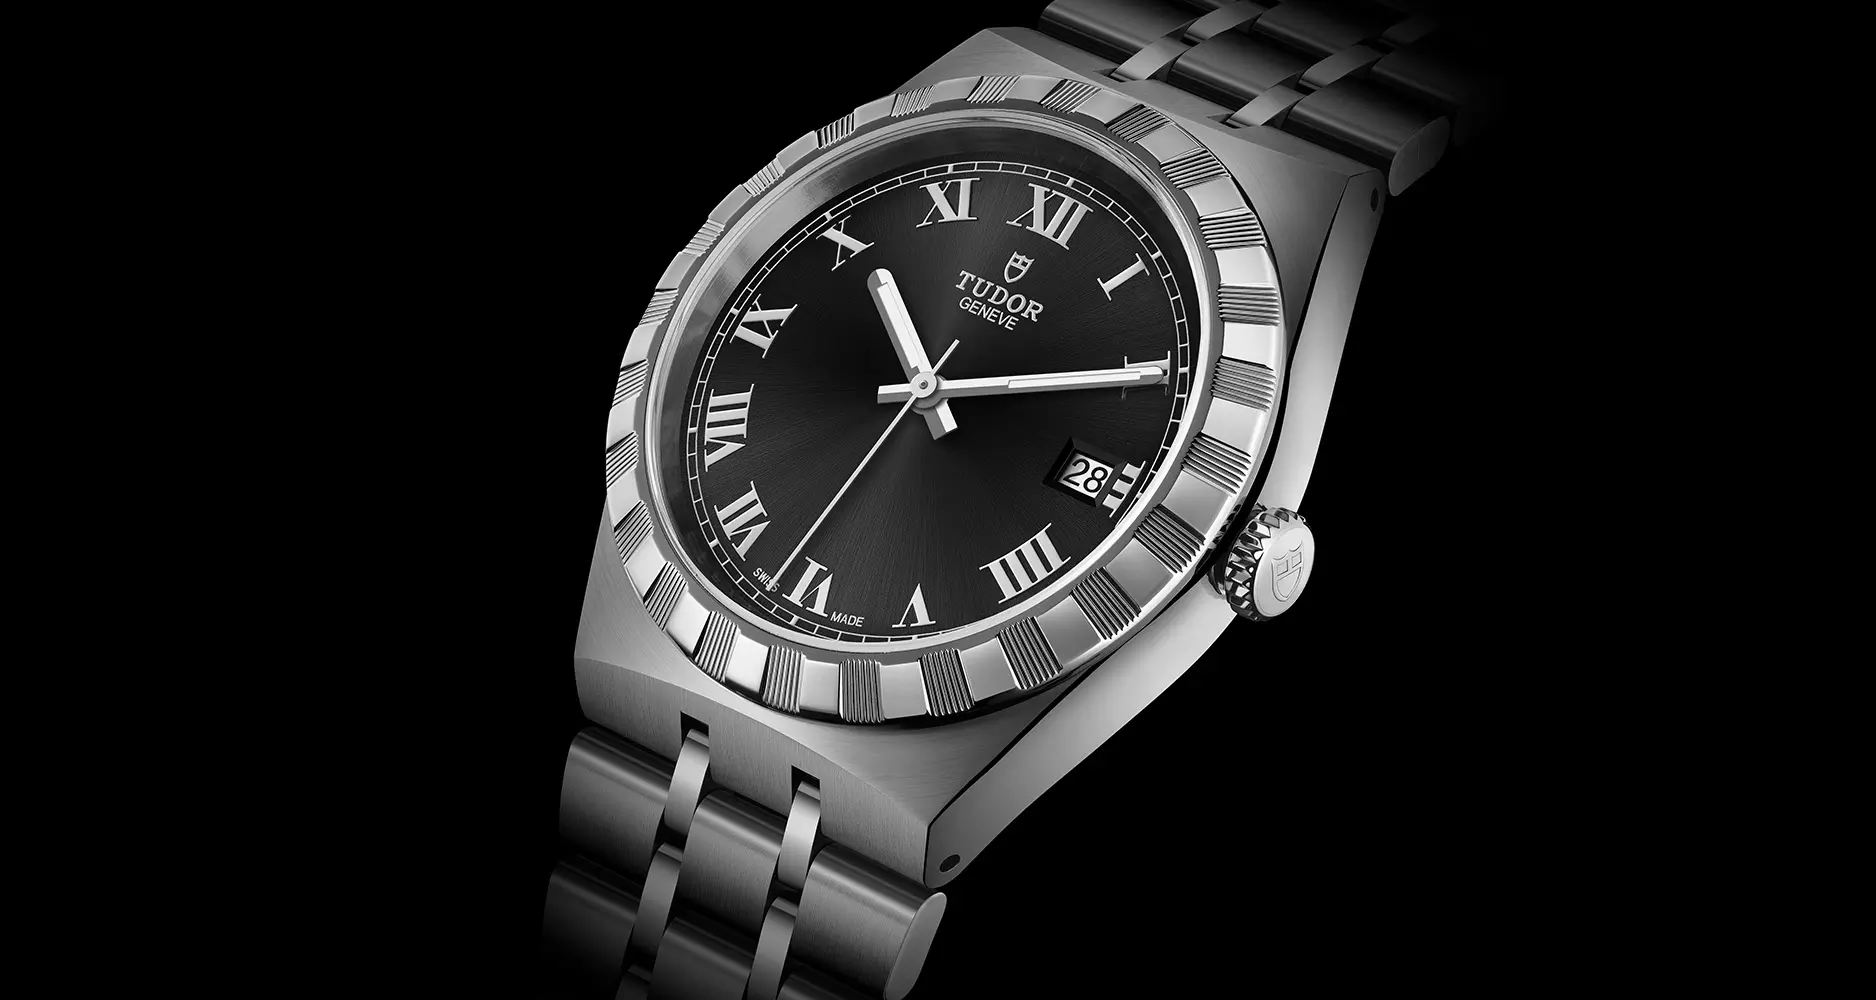 The Tudor Royal 38mm in stainless steel case and bracelet with black dial.